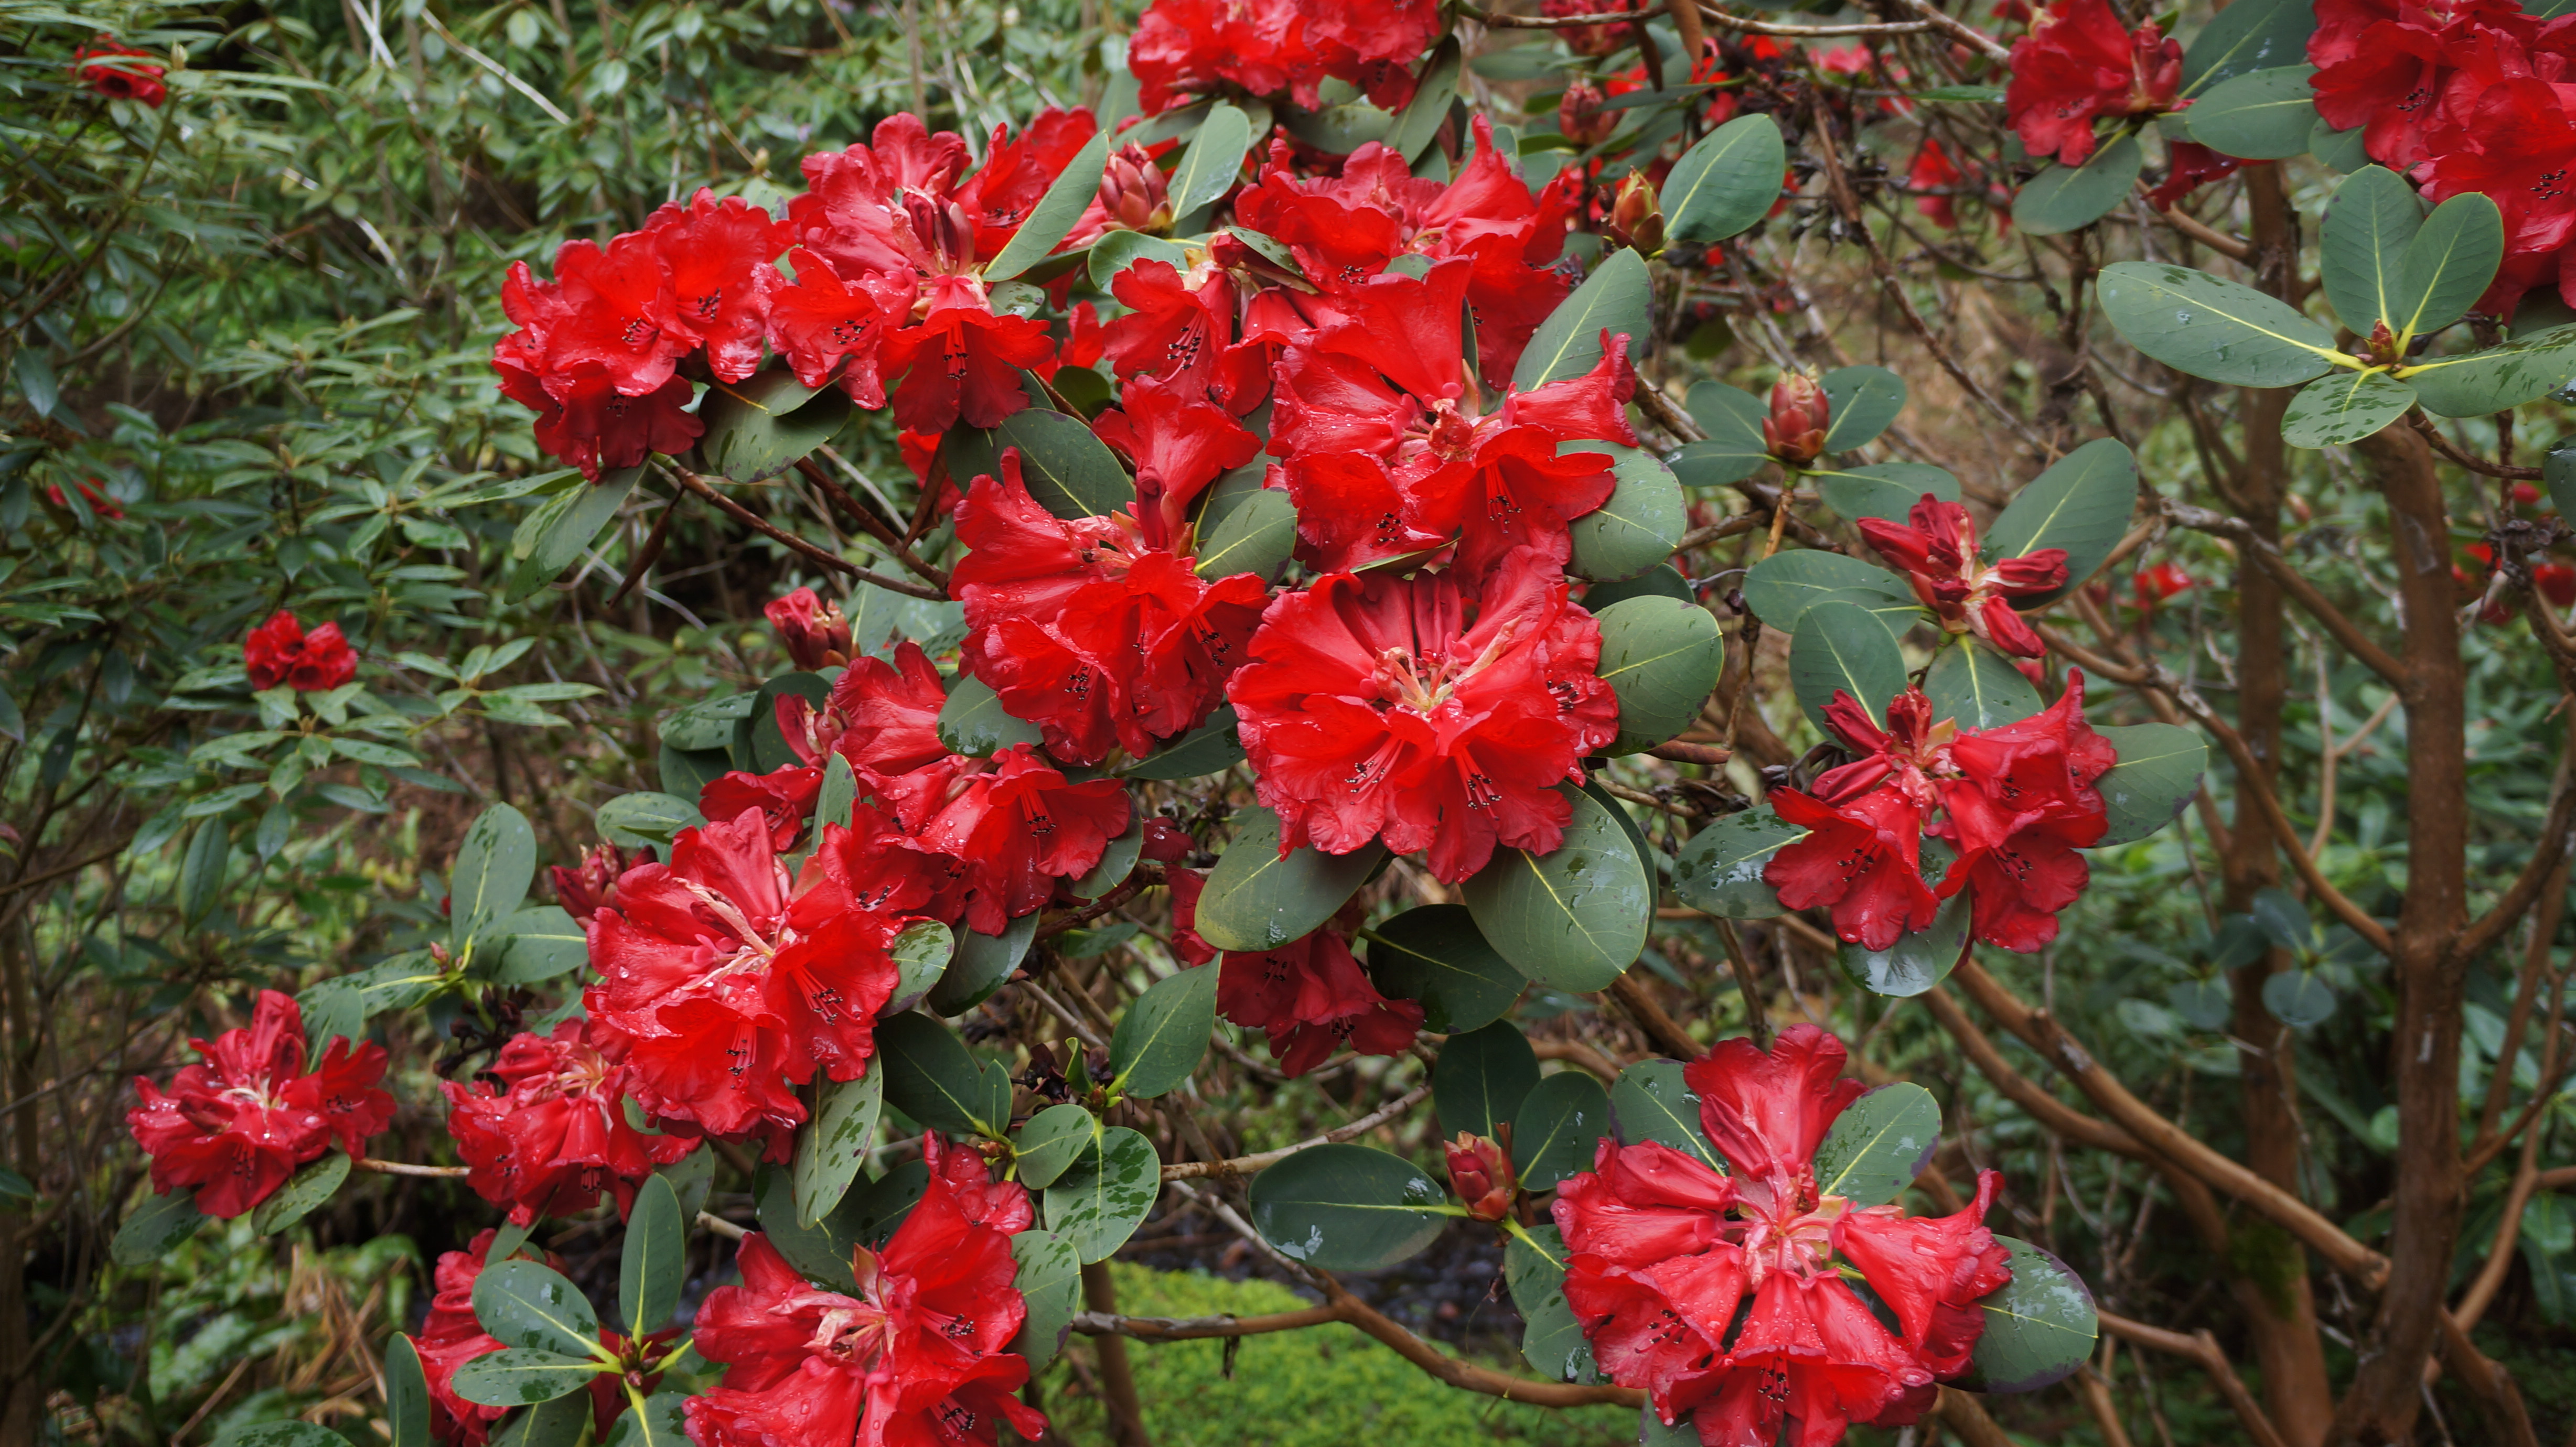 MEDDIANUM Rhododendron Larger Species Rhododendrons